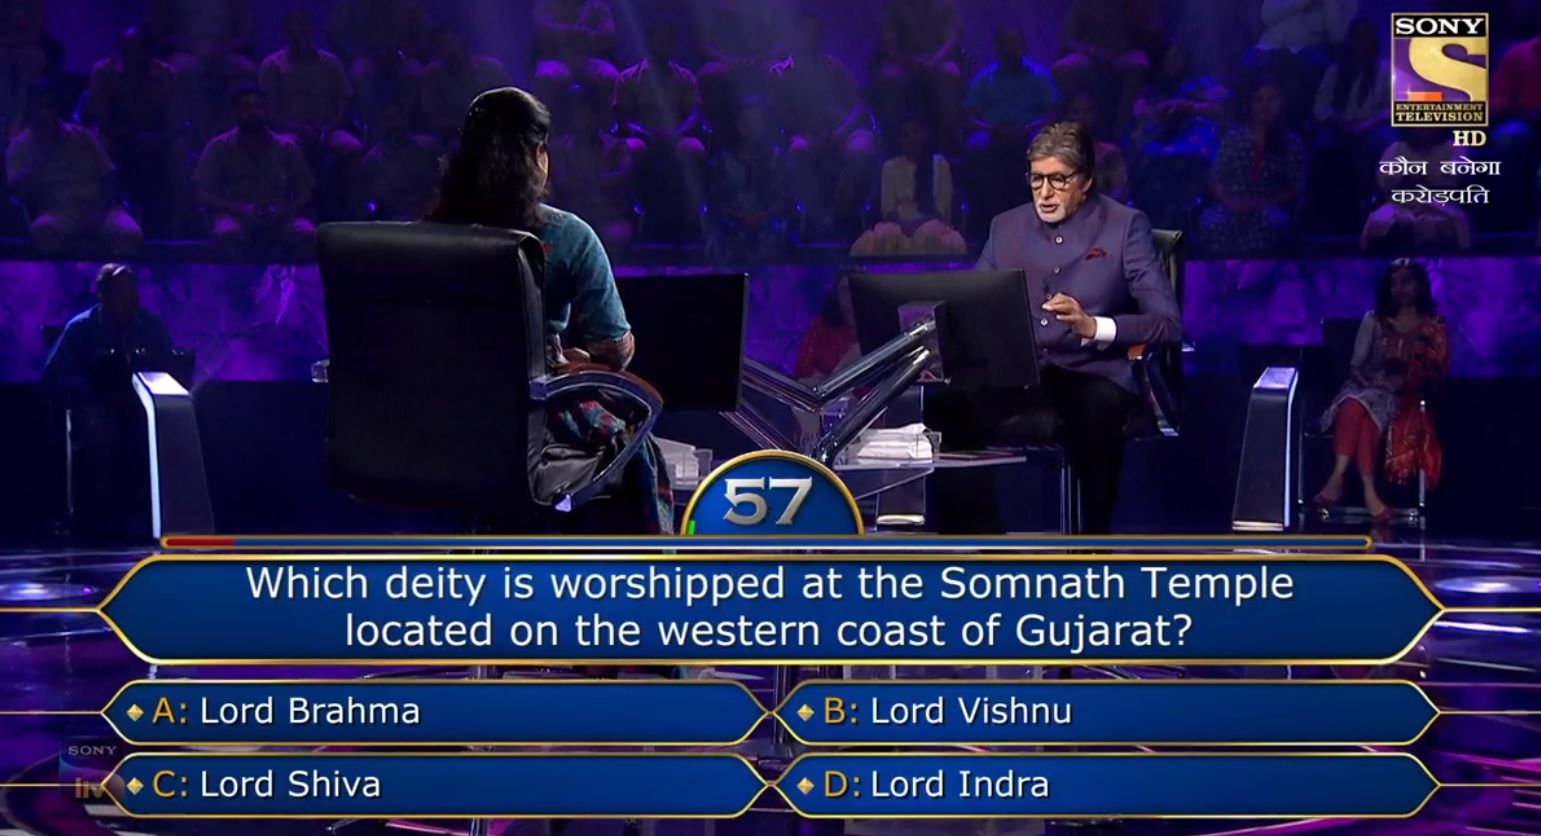 Ques : Which deity is worshipped at the Somnath Temple located on the western coast of Gujarat?